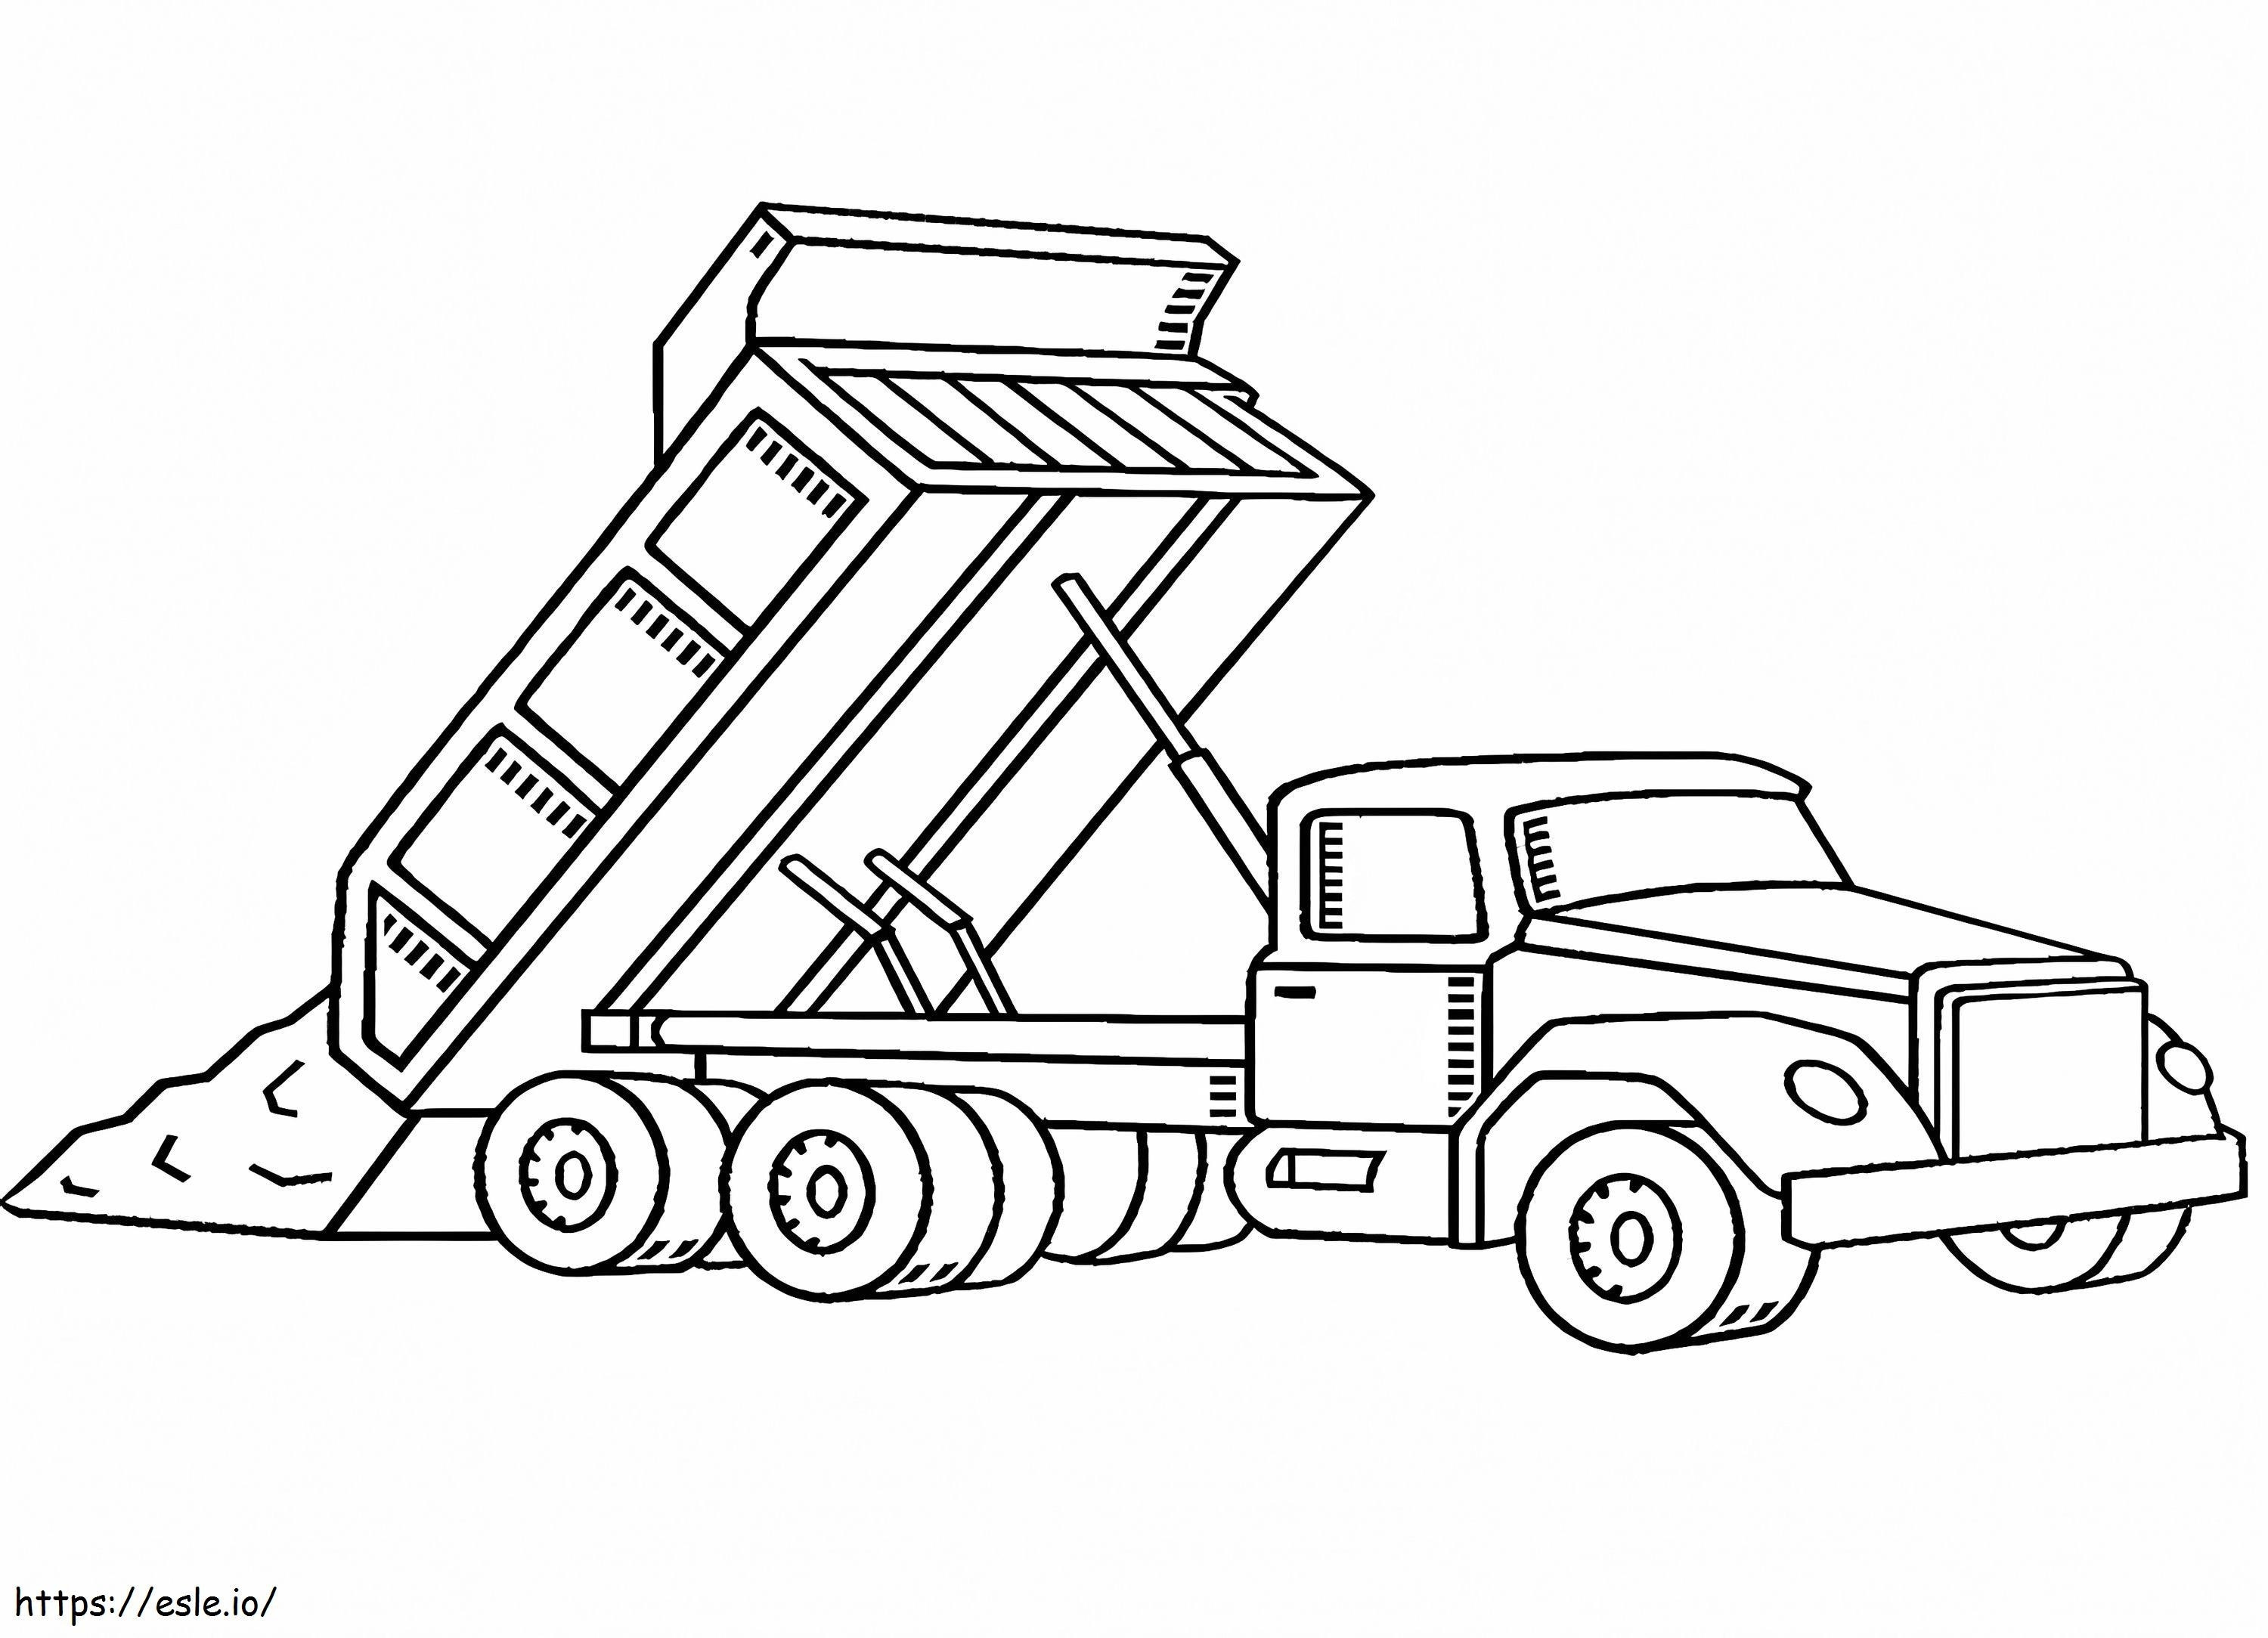 Working Dump Truck coloring page